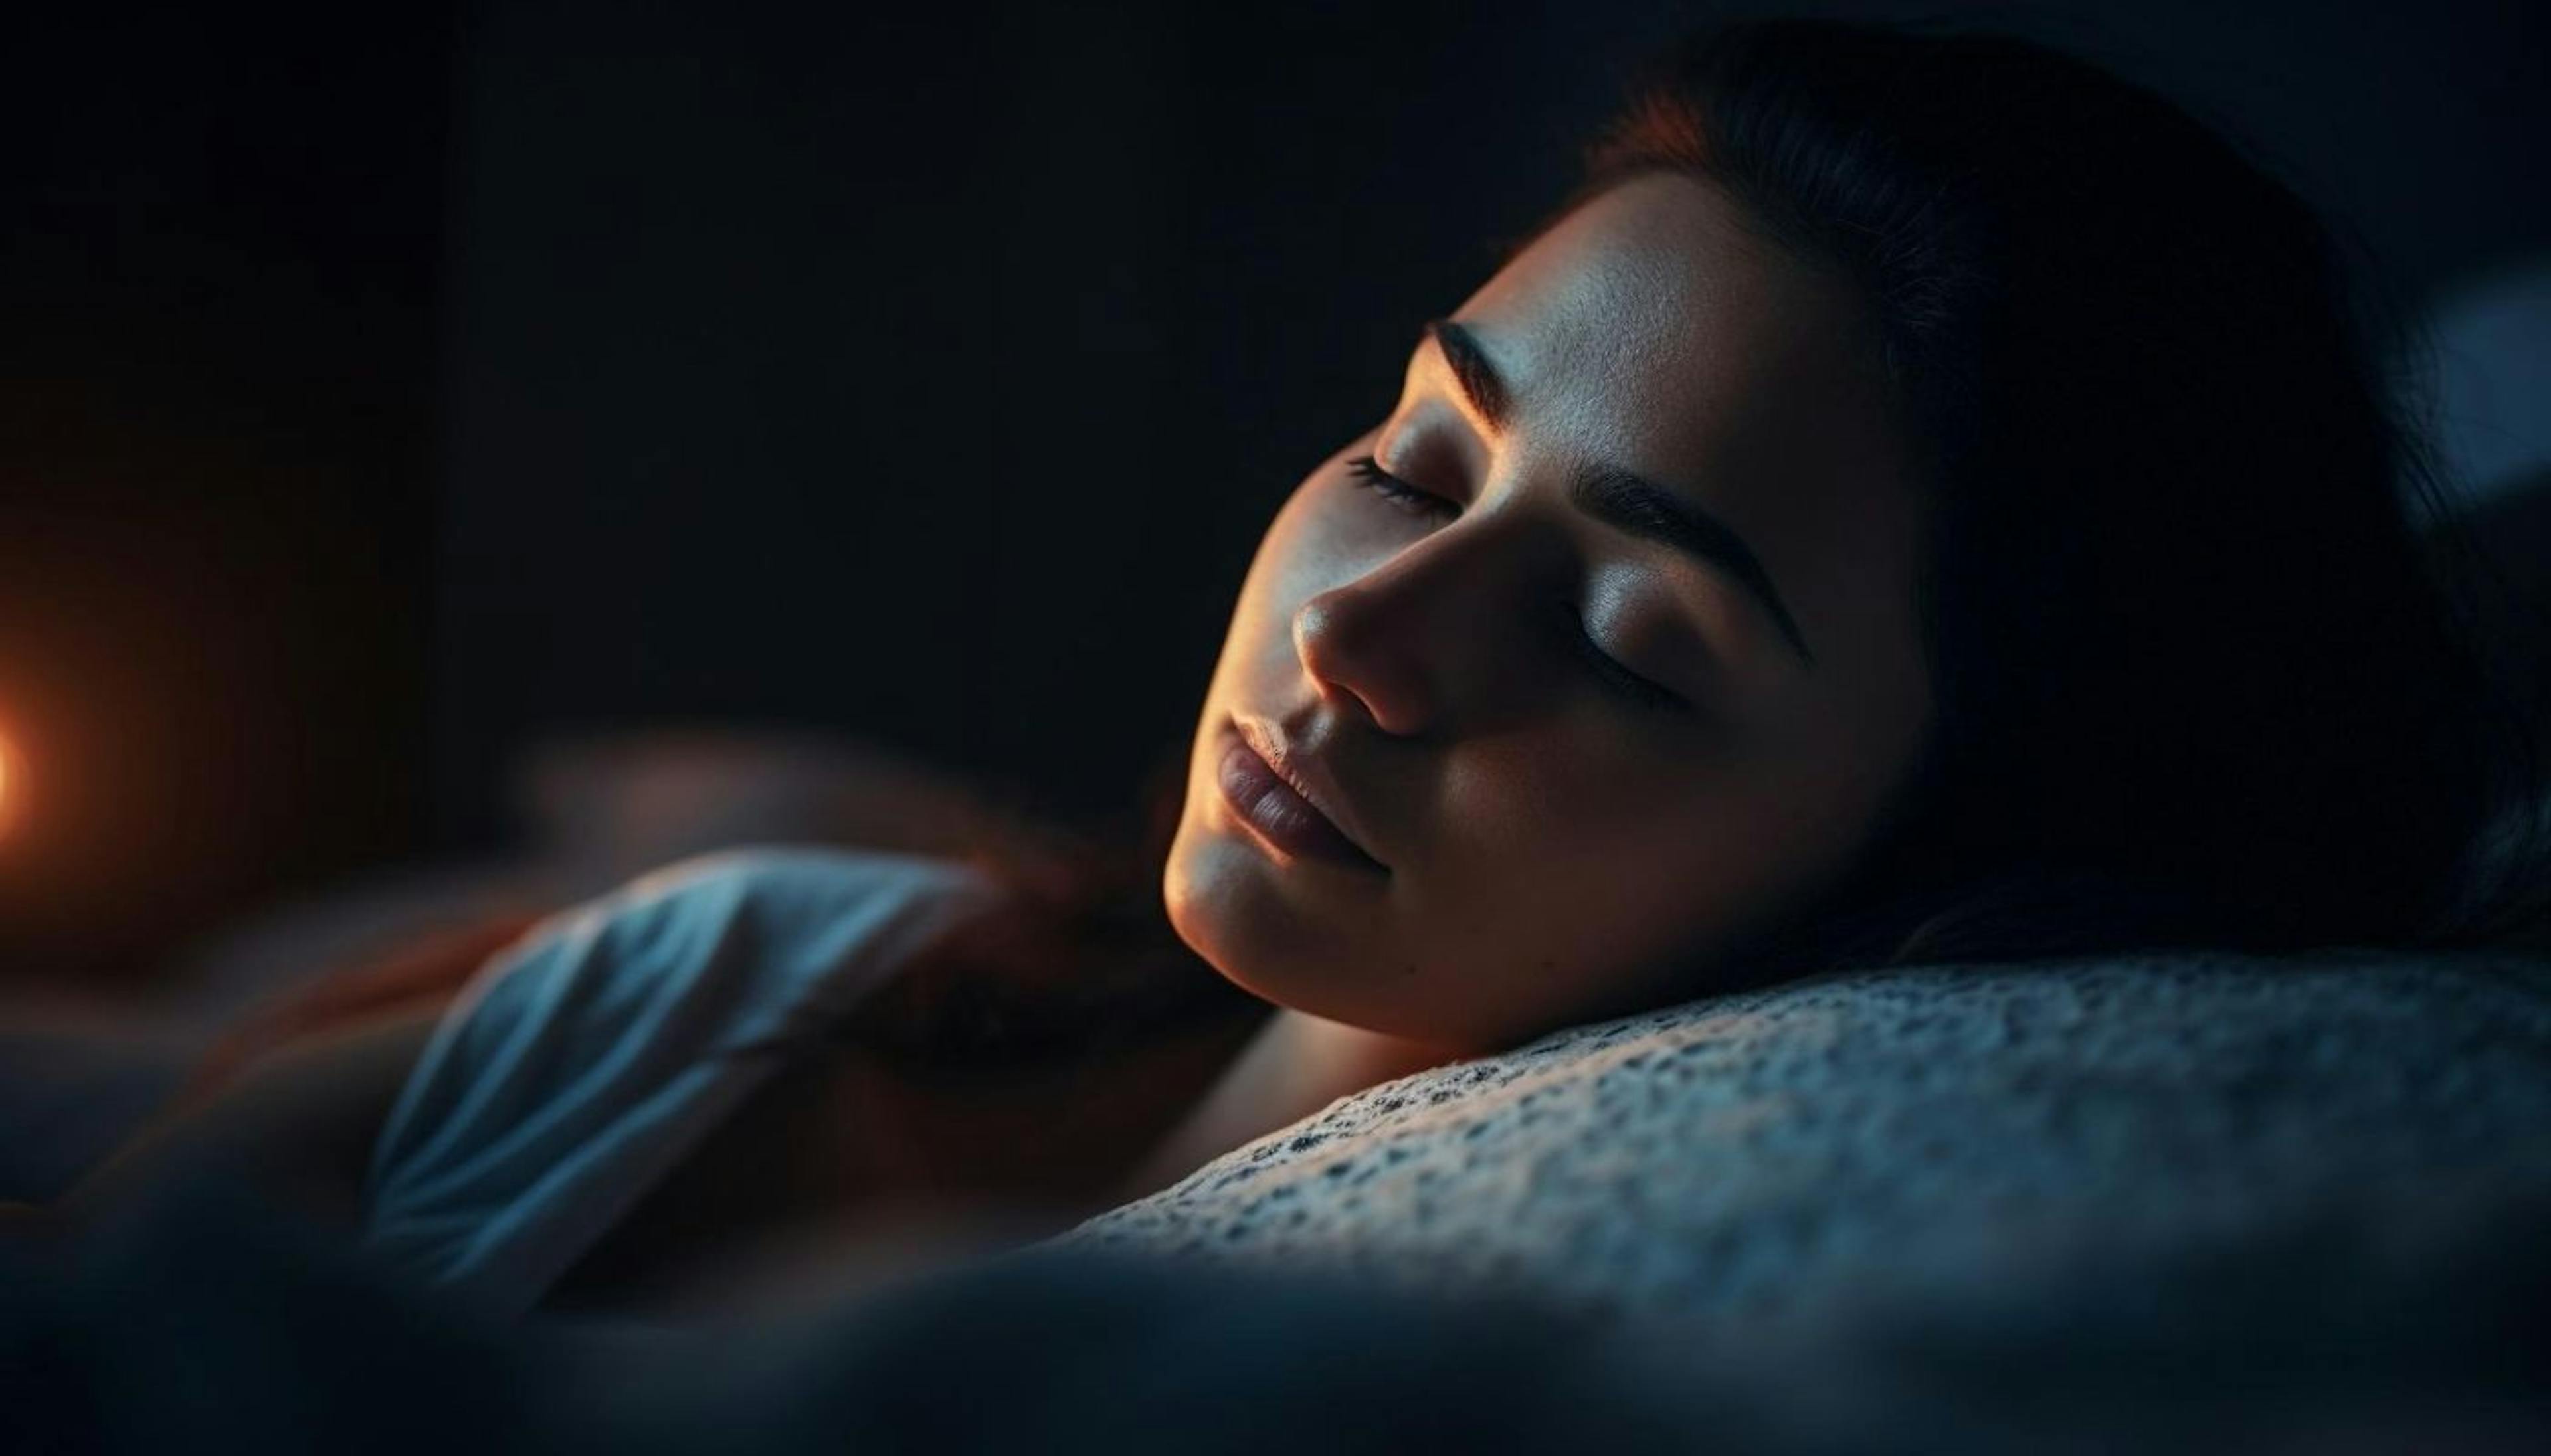 Young woman sleeping in a dream state